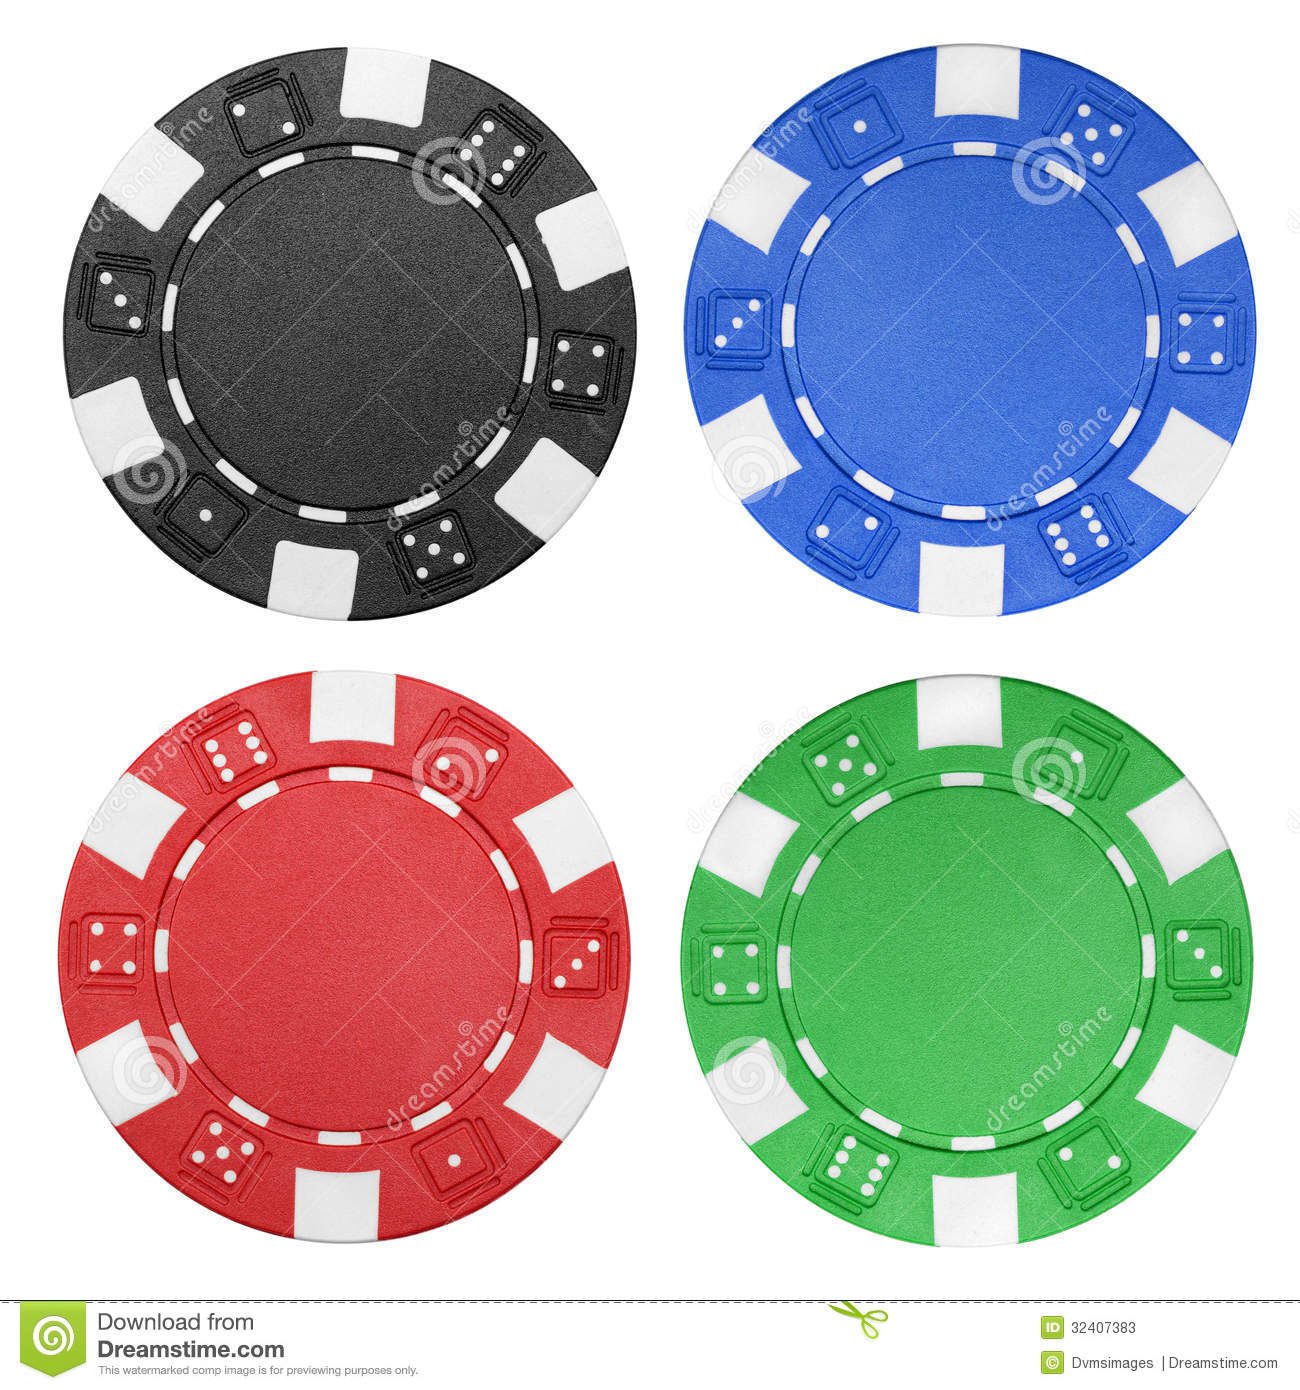 Crown Casino Roulette Max Bet